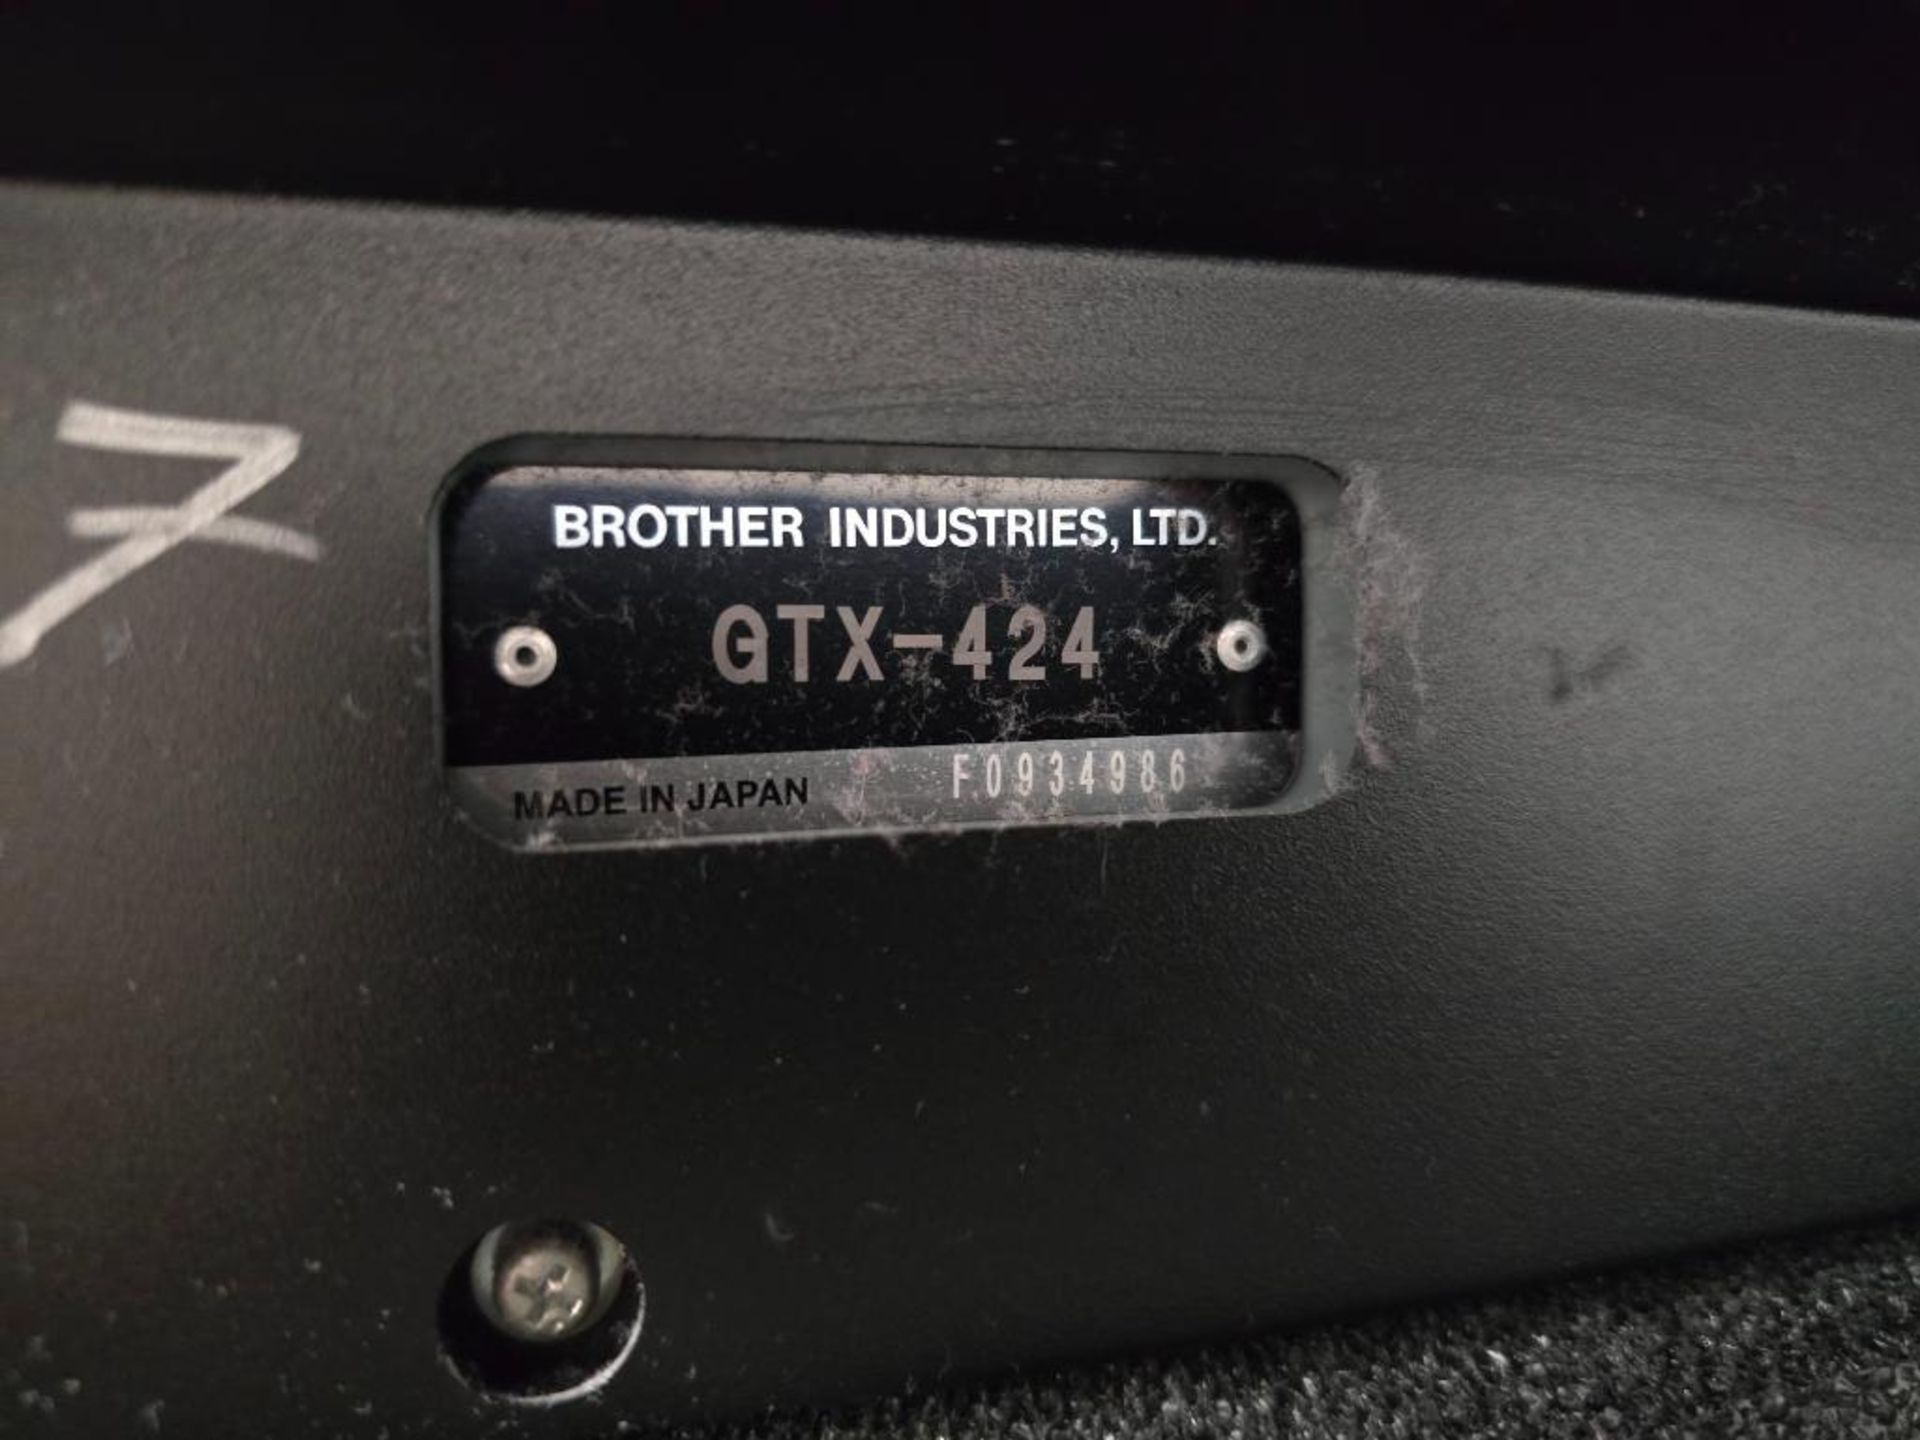 2022 Brother GTX-424 Pro-B DTG (Direct to Garment) Printer, Twin Head, 5-Color, Water Based Pigmente - Image 8 of 8